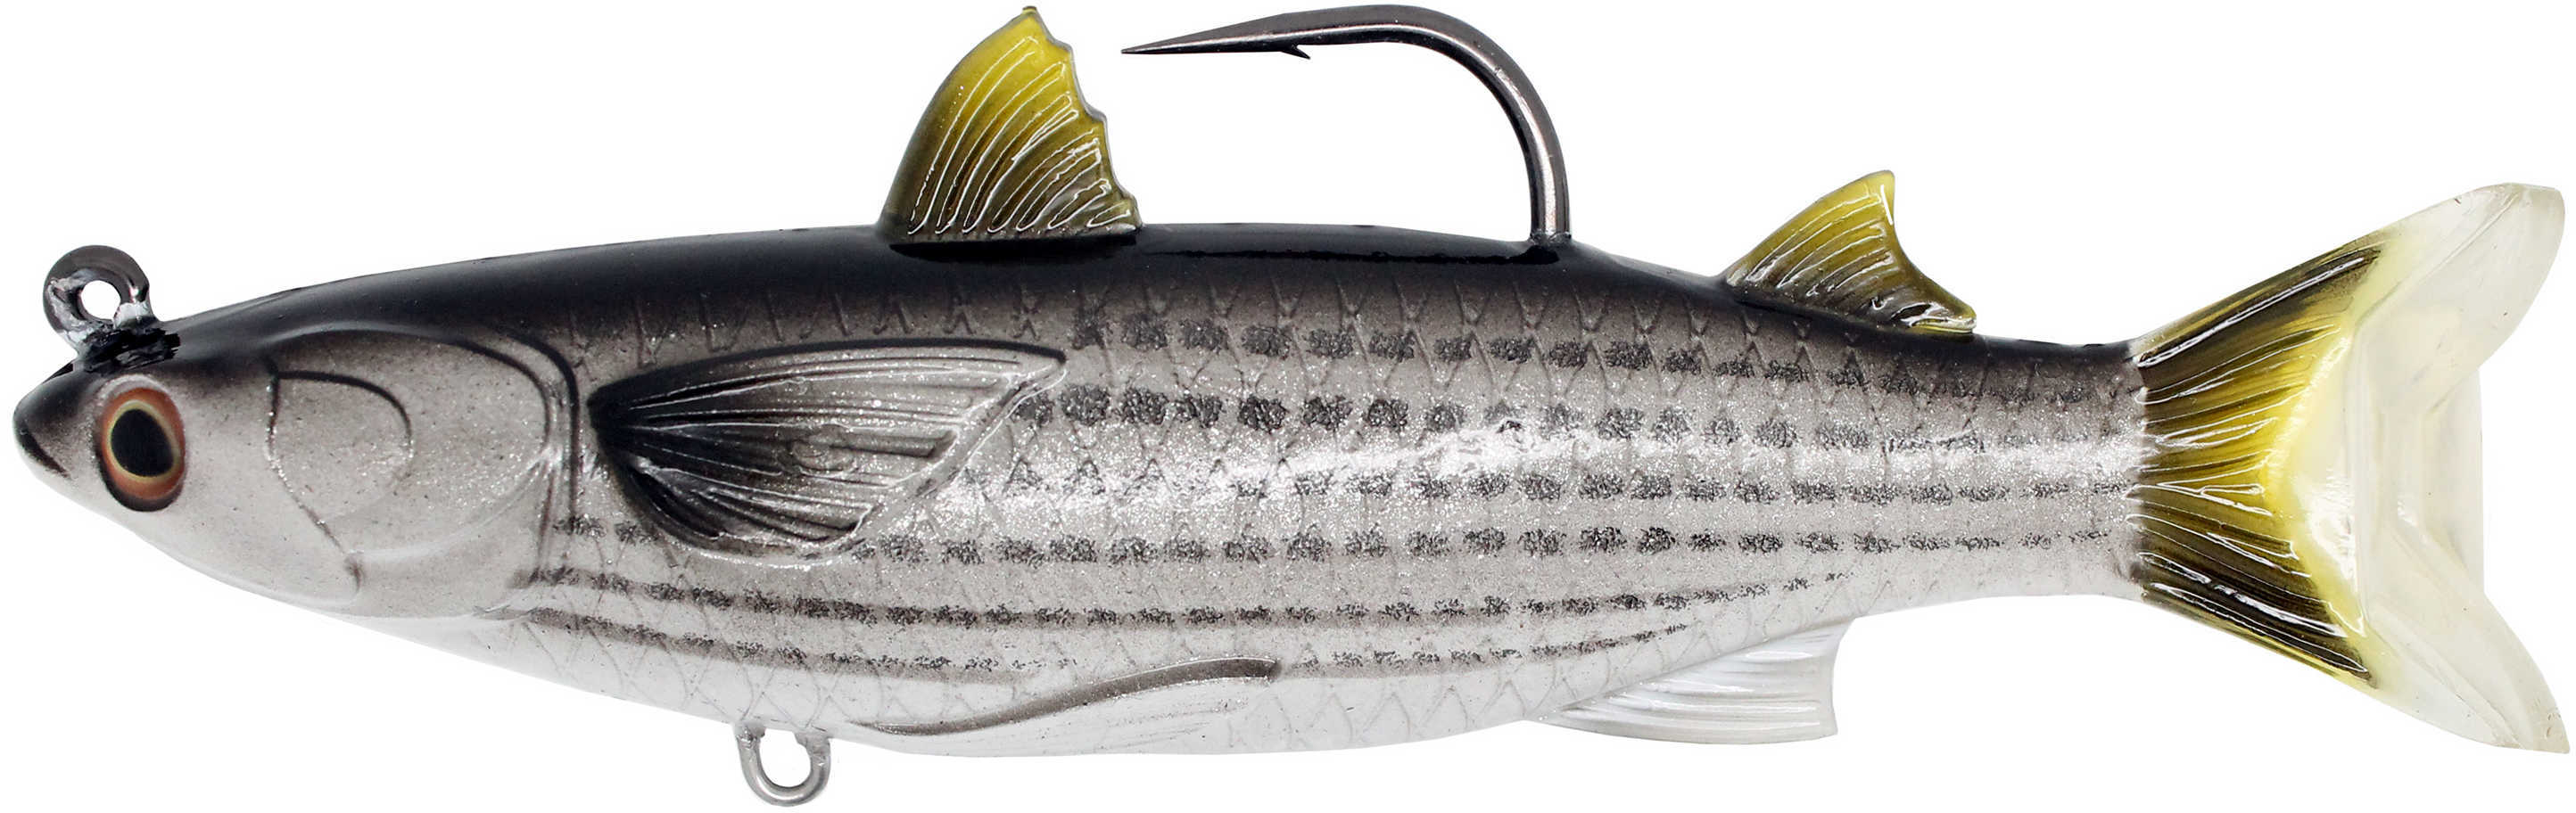 LIVETARGET Lures / Koppers Fishing and Tackle Corp Mullet Twitchbait Saltwater 4.5 Inches 7/0 Hook Medium/Slow Sinking Silver/Blac